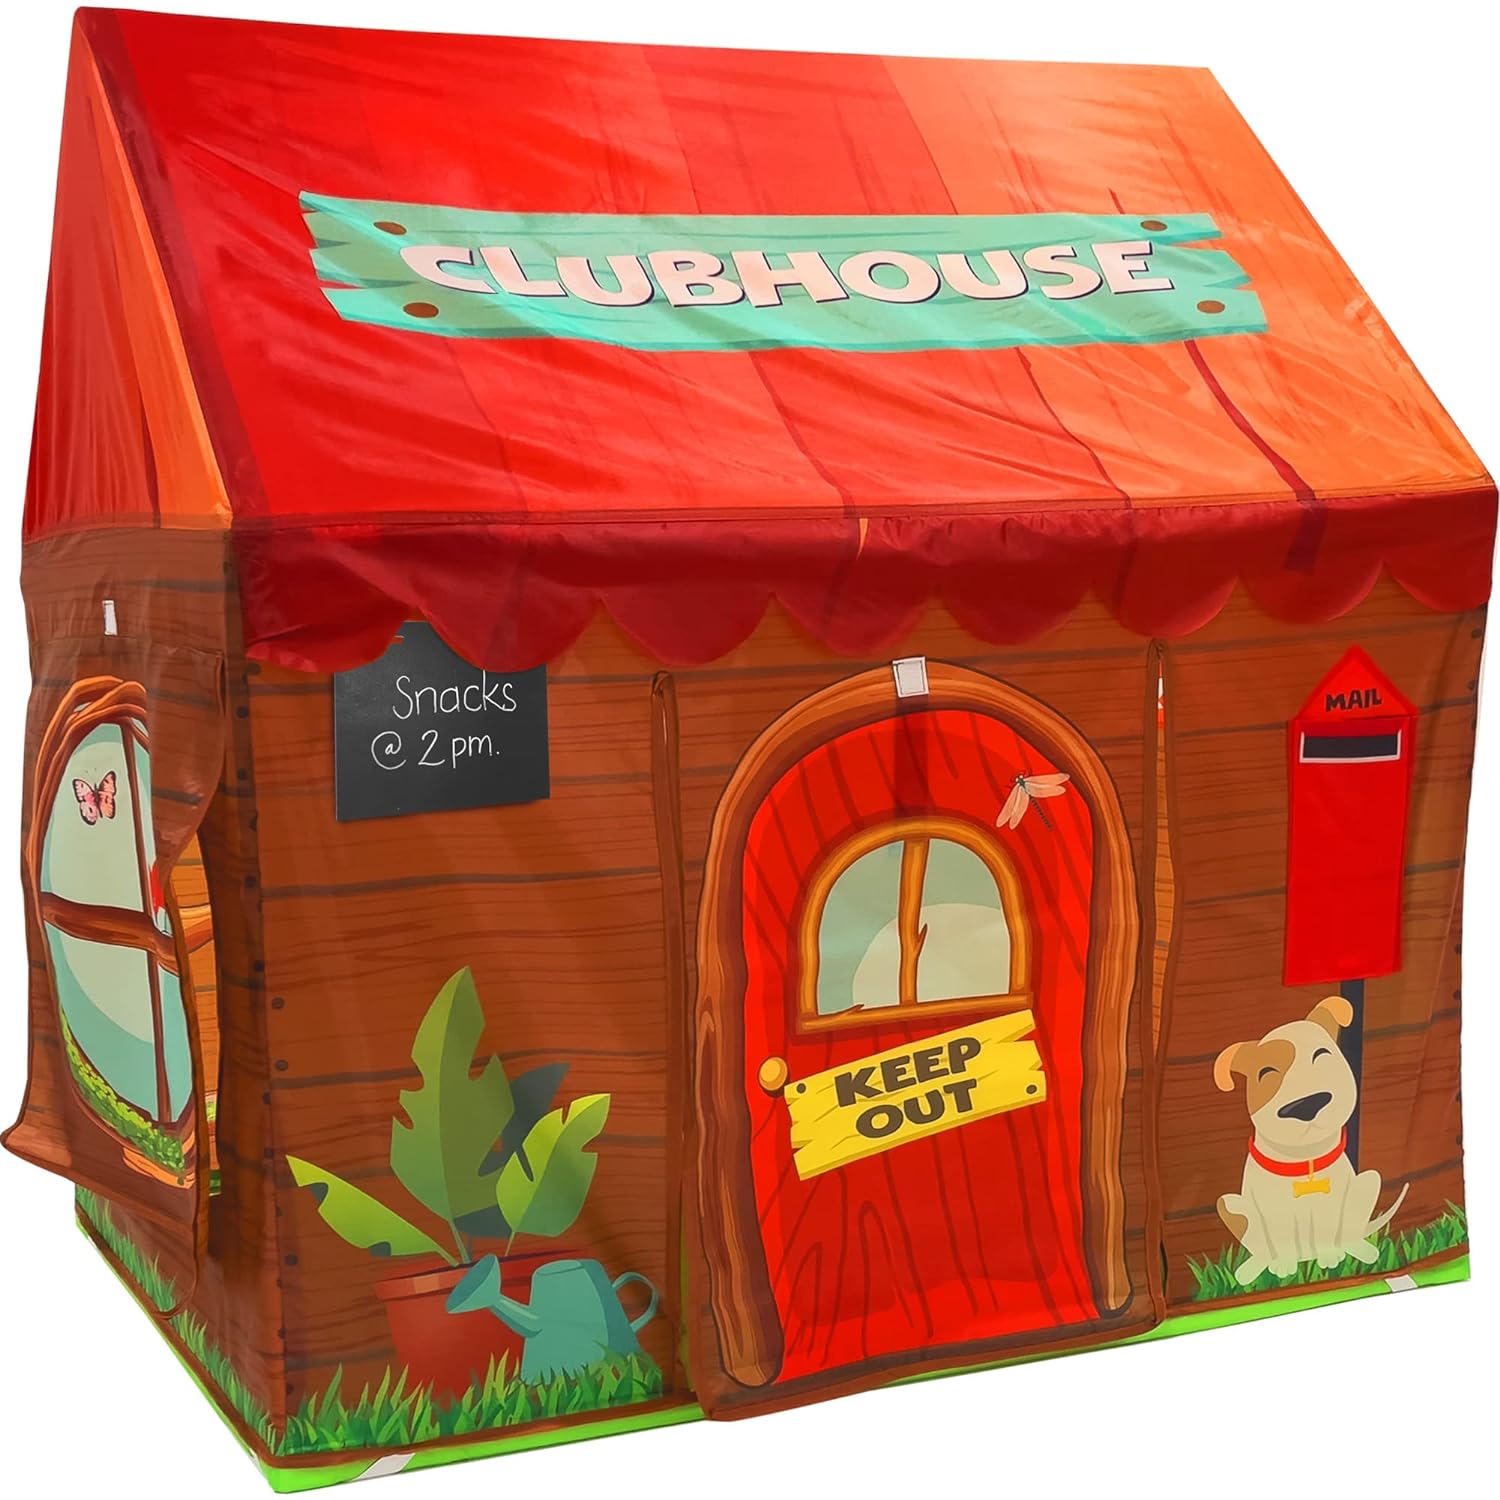 thinkstar Clubhouse Indoor Play Tent Playhouse For Kids Boys And Girls Toddler Pretend House Fort